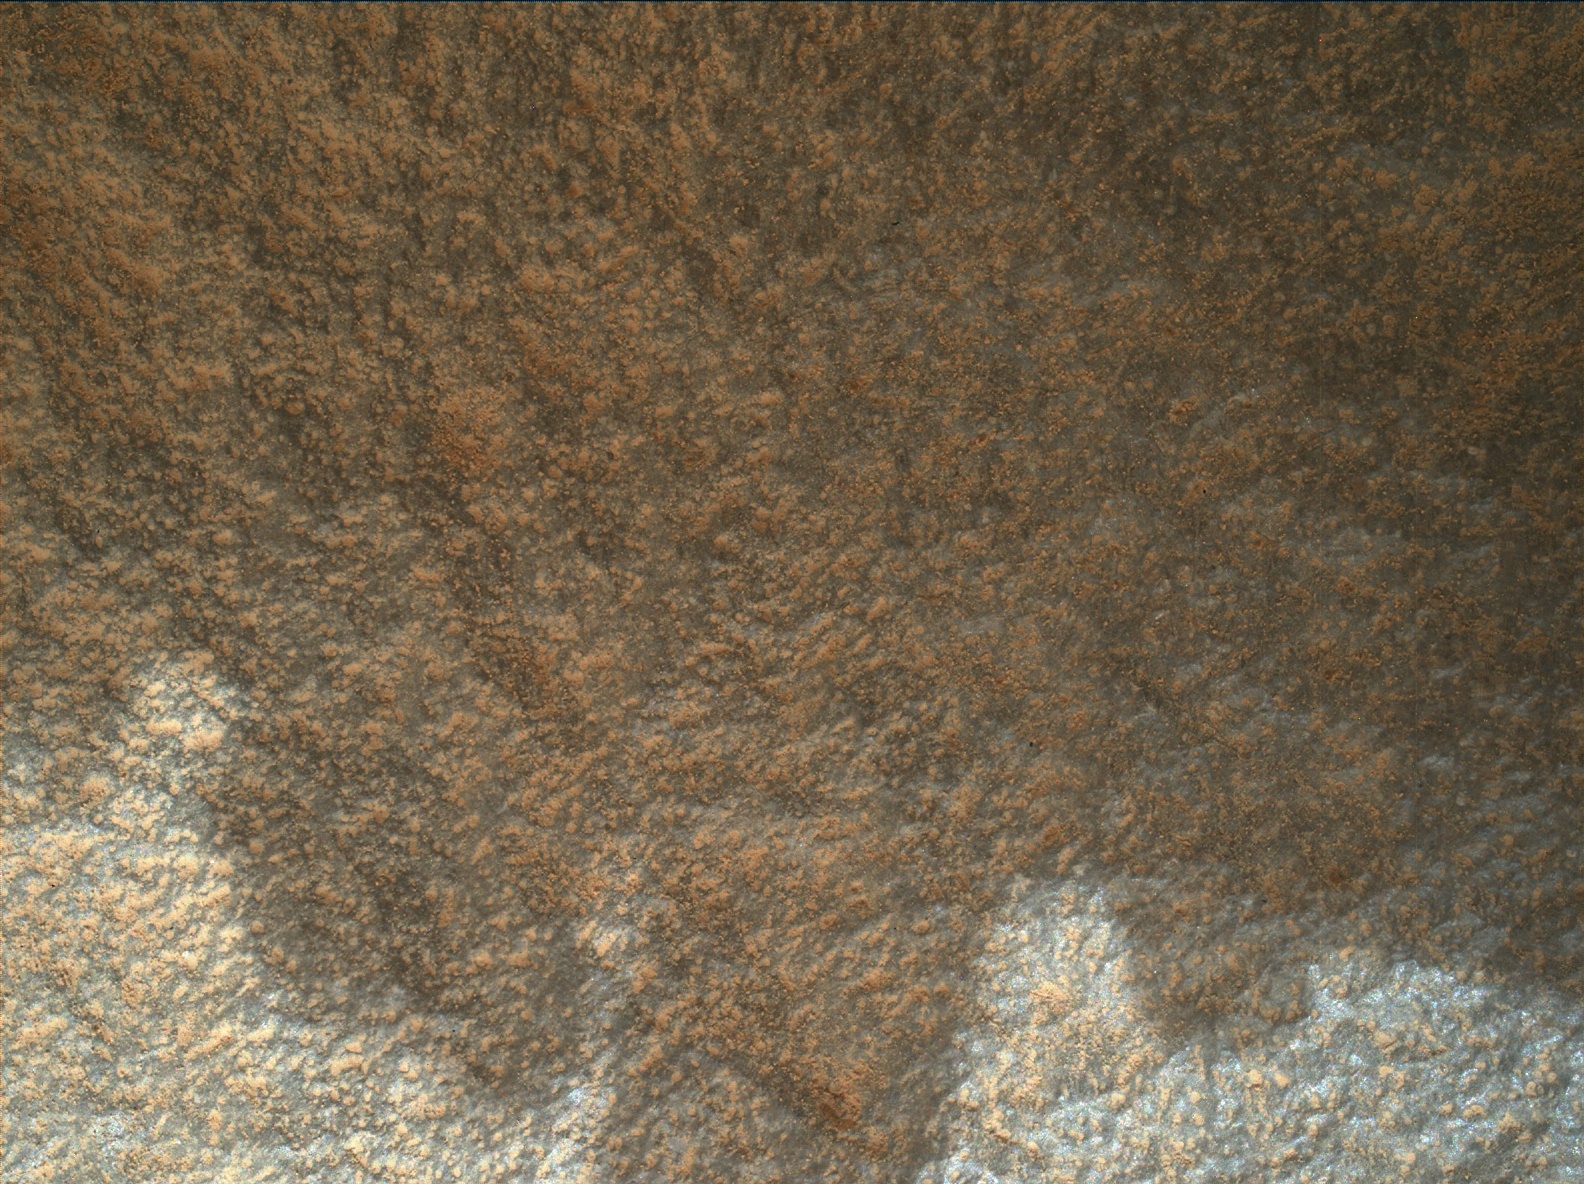 Nasa's Mars rover Curiosity acquired this image using its Mars Hand Lens Imager (MAHLI) on Sol 975